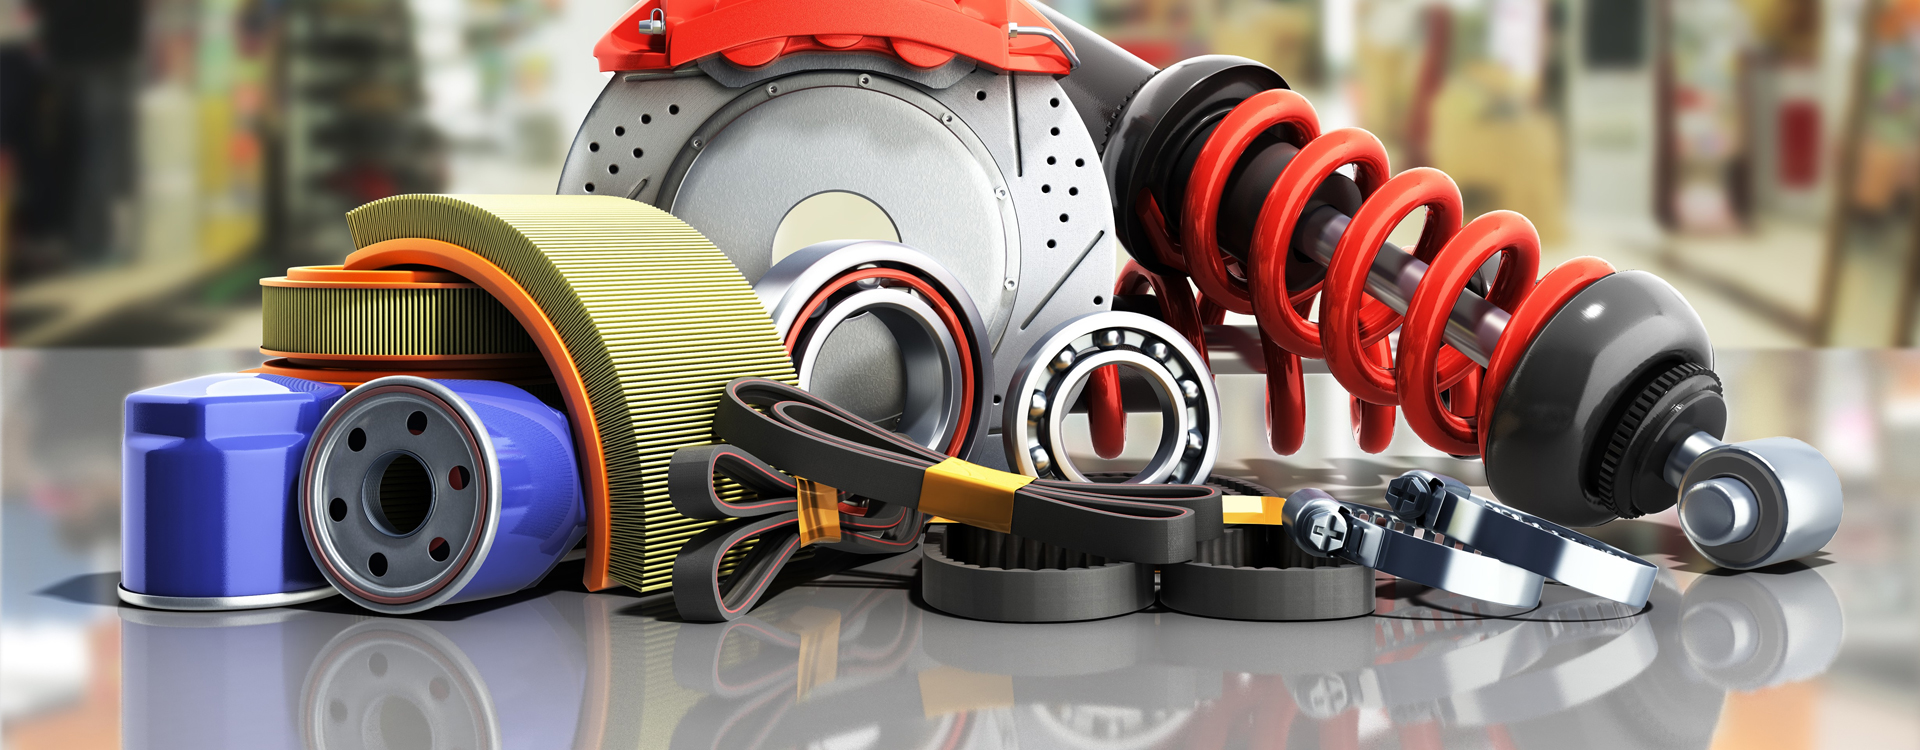 Types of Automotive Parts and Accessories